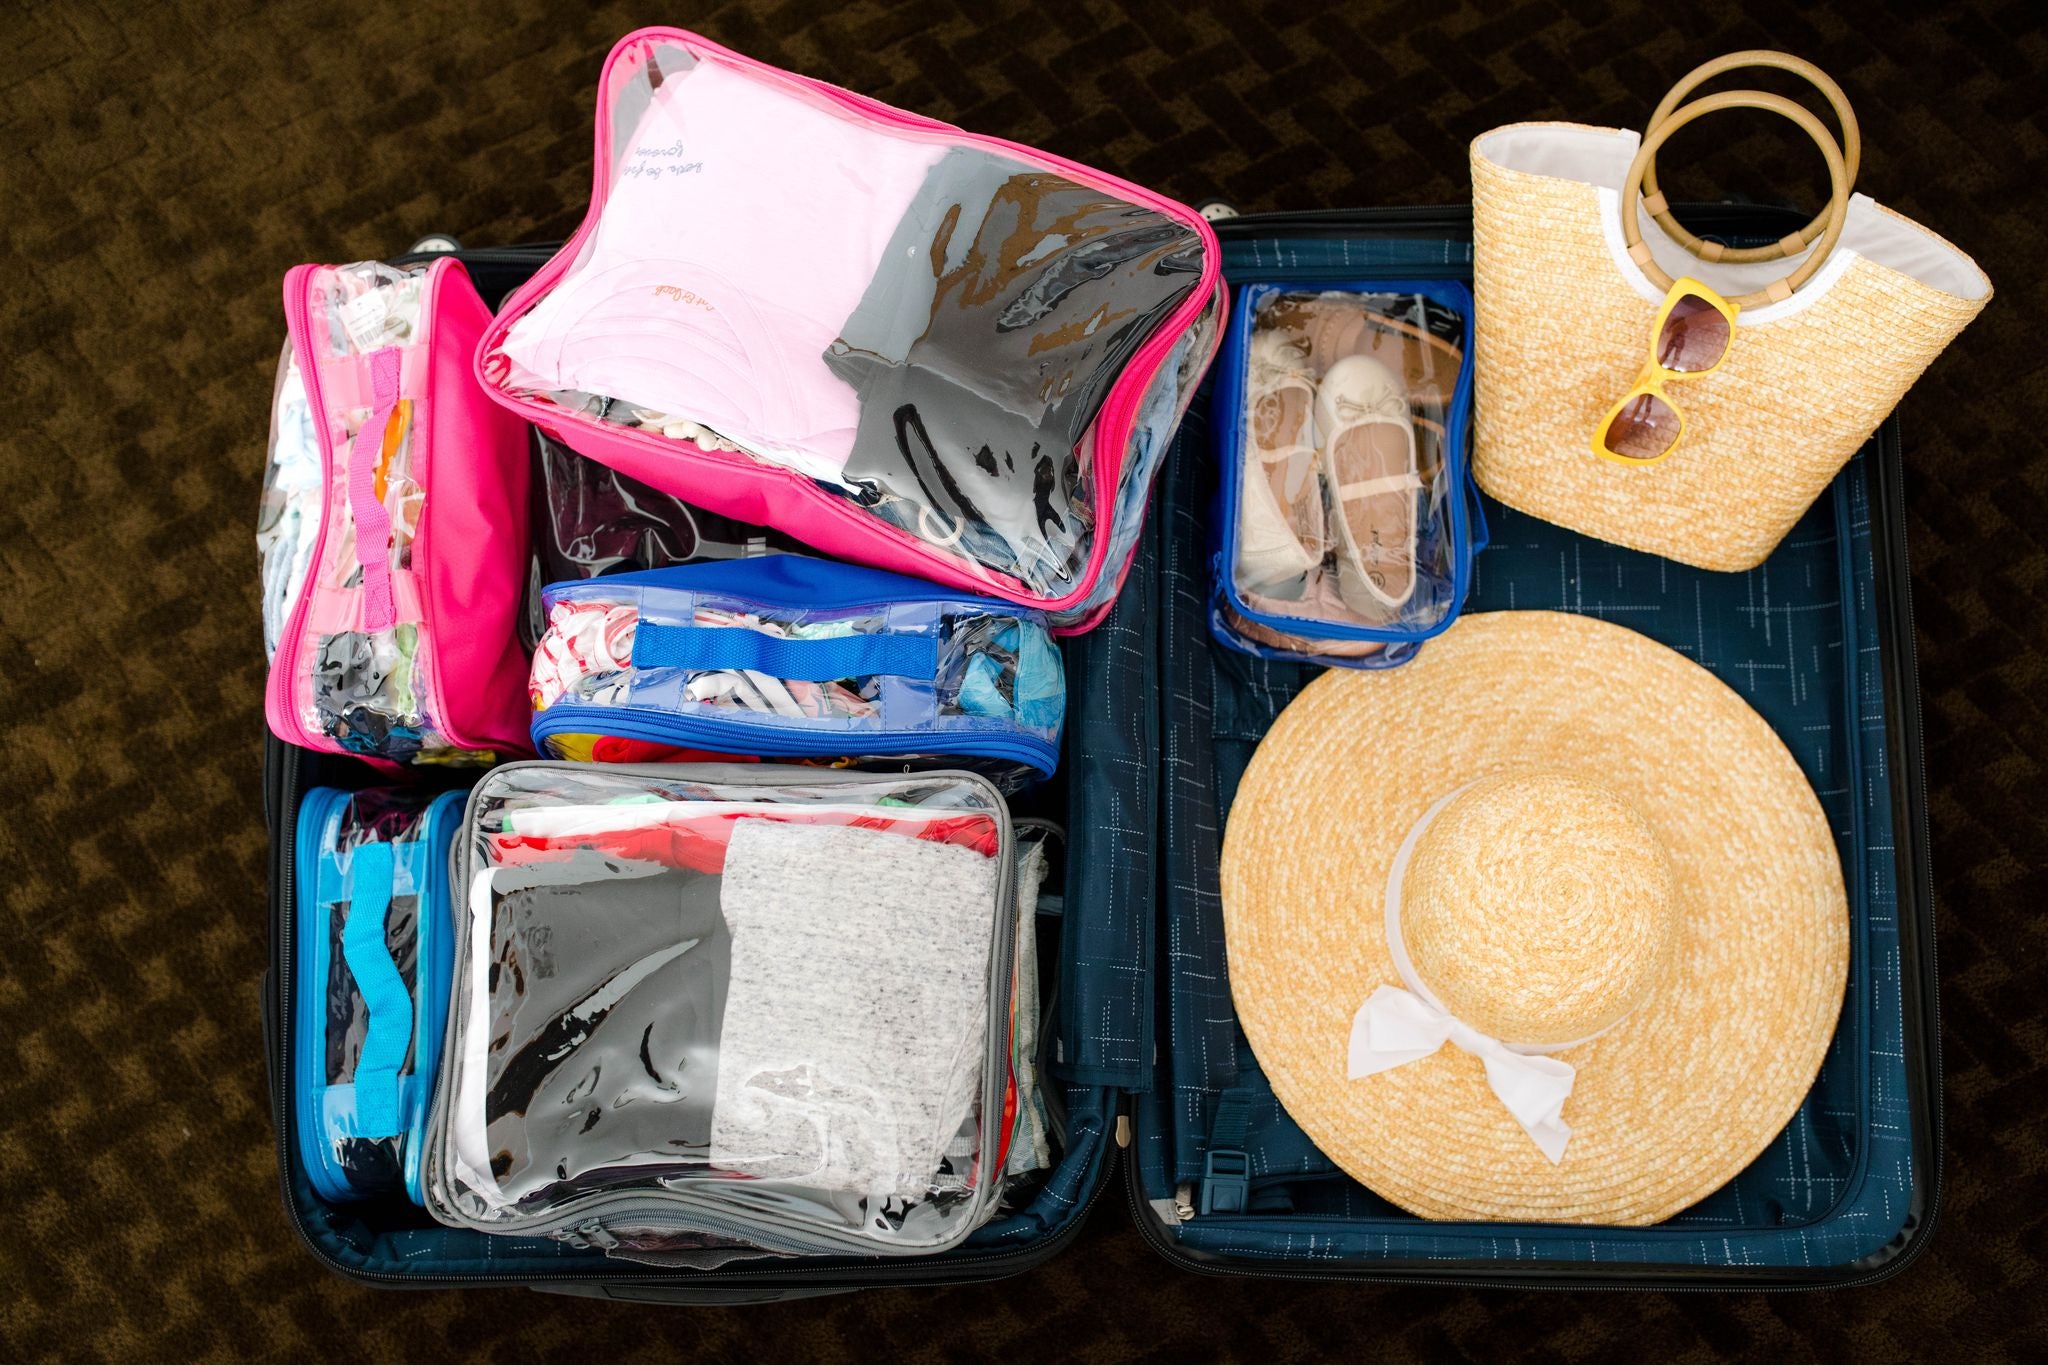 Suitcase organized with clear packing cubes